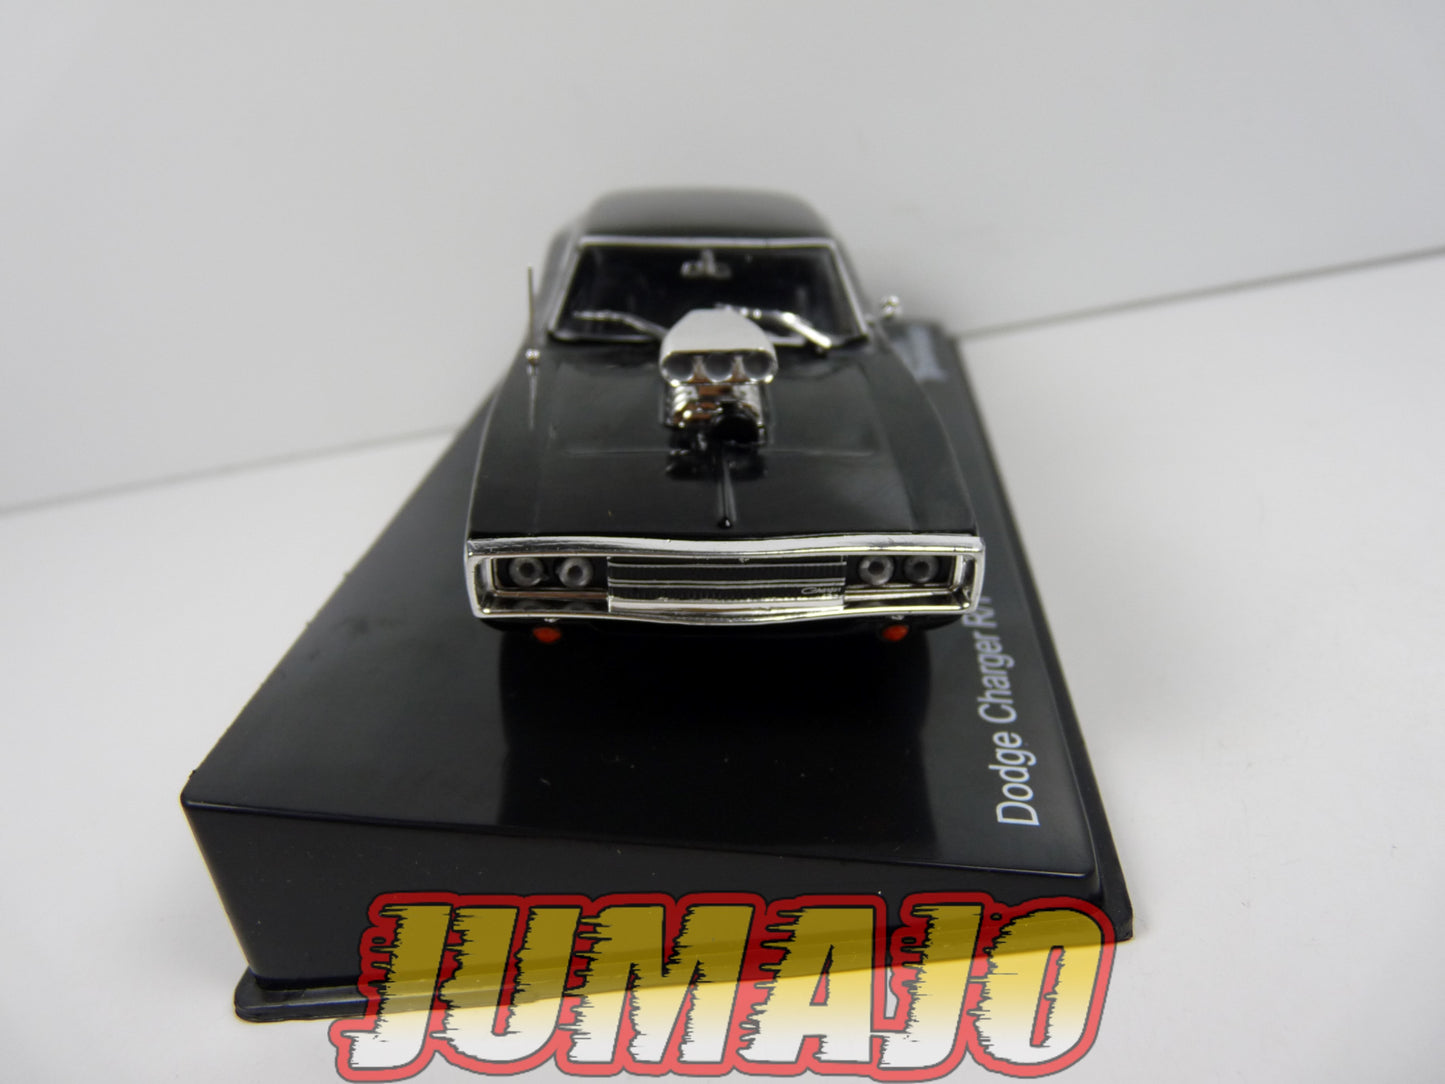 DIV29 Voiture 1/43 IXO altaya Fast and Furious Dodge Charger R/T